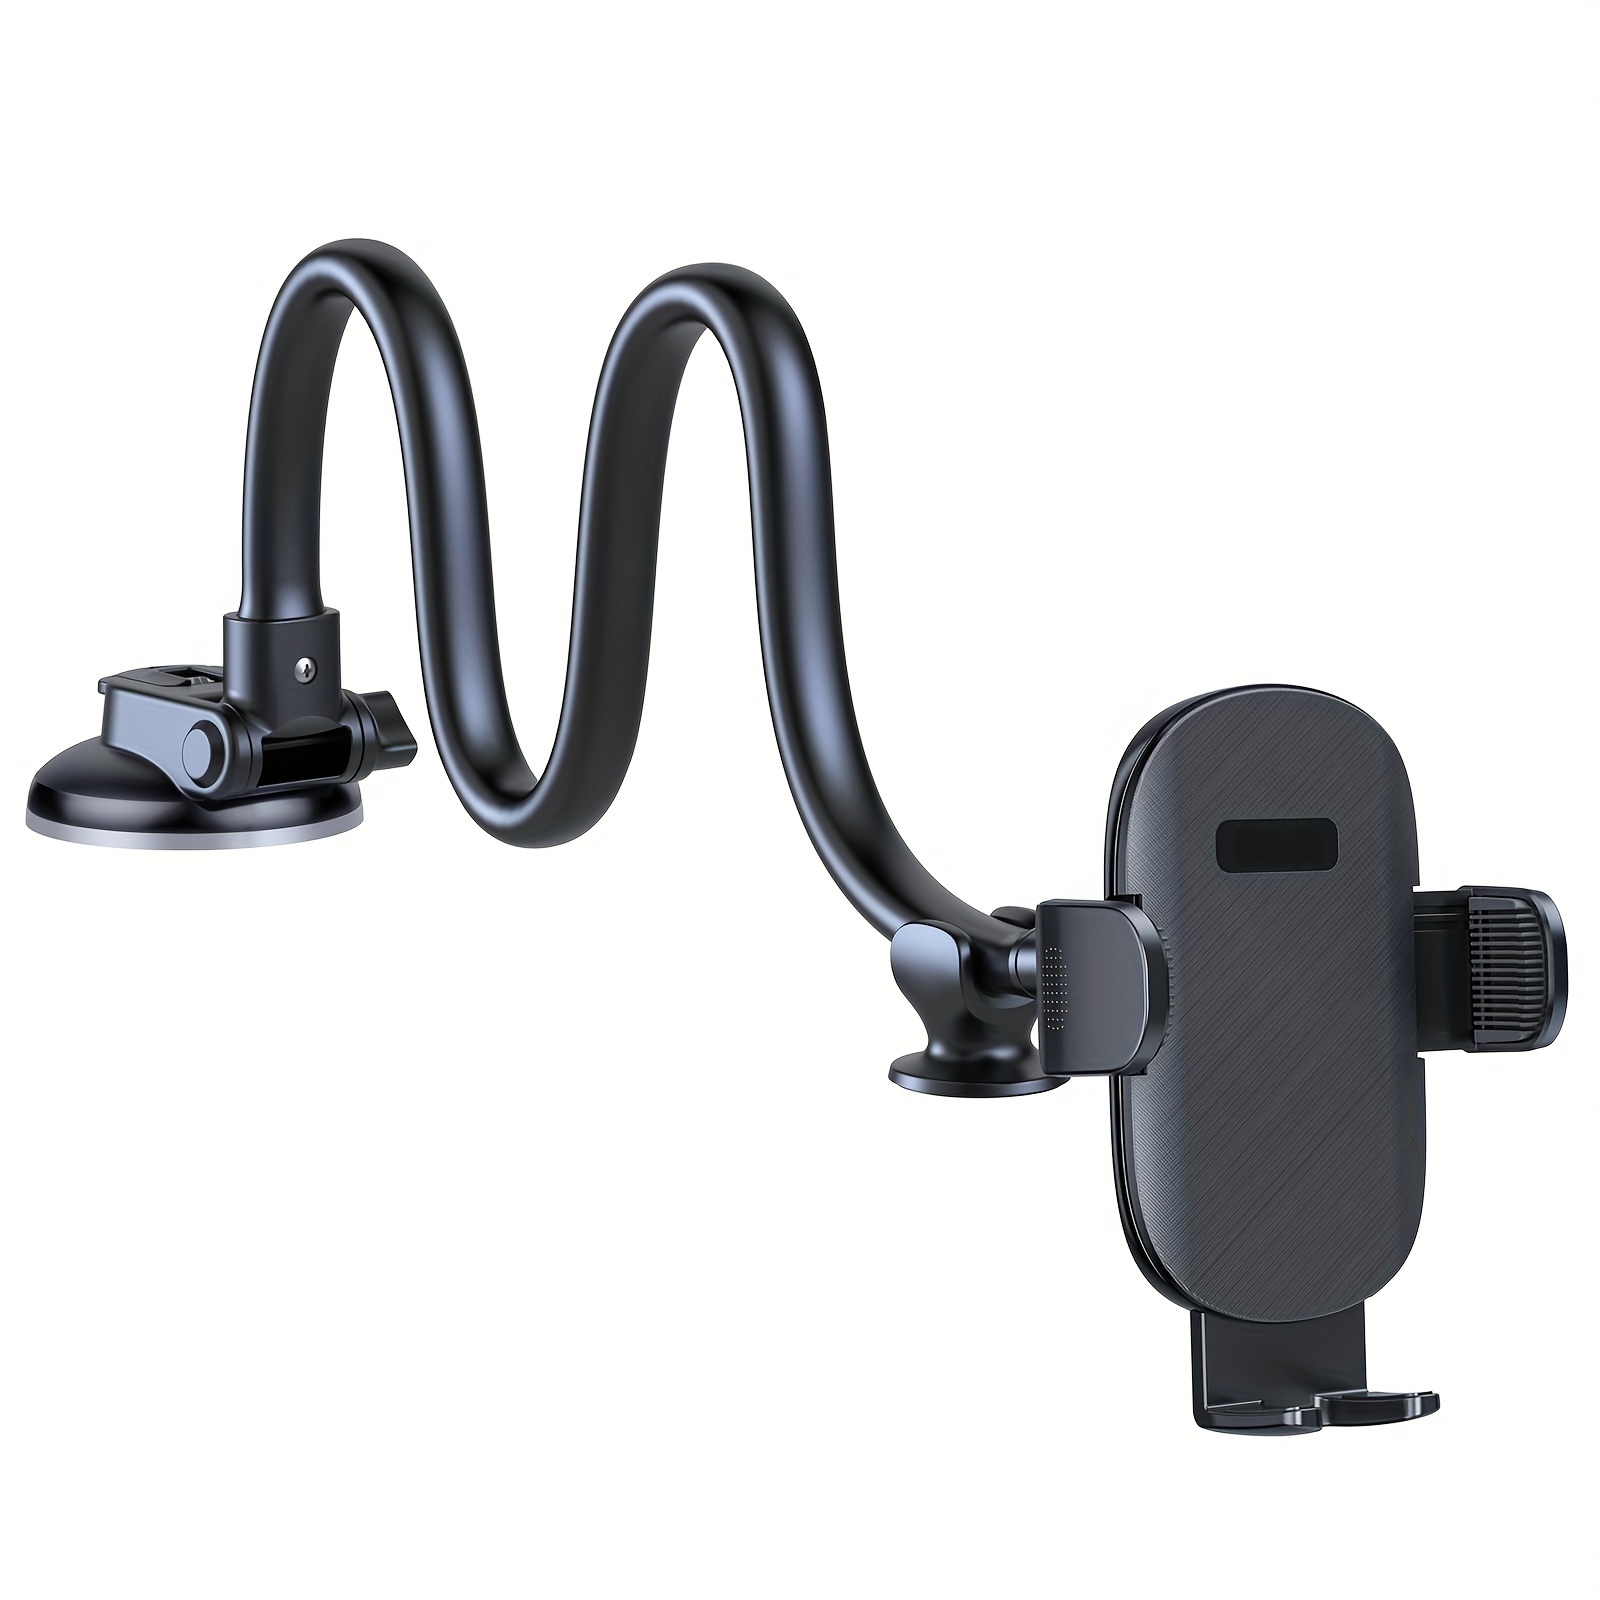 

Solid Car Truck Phone Mount Holder With Gooseneck Long Arm, Dashboard Mobile Holders Industrial-strength Strong Suction Cup, Anti-shake Stabilizer